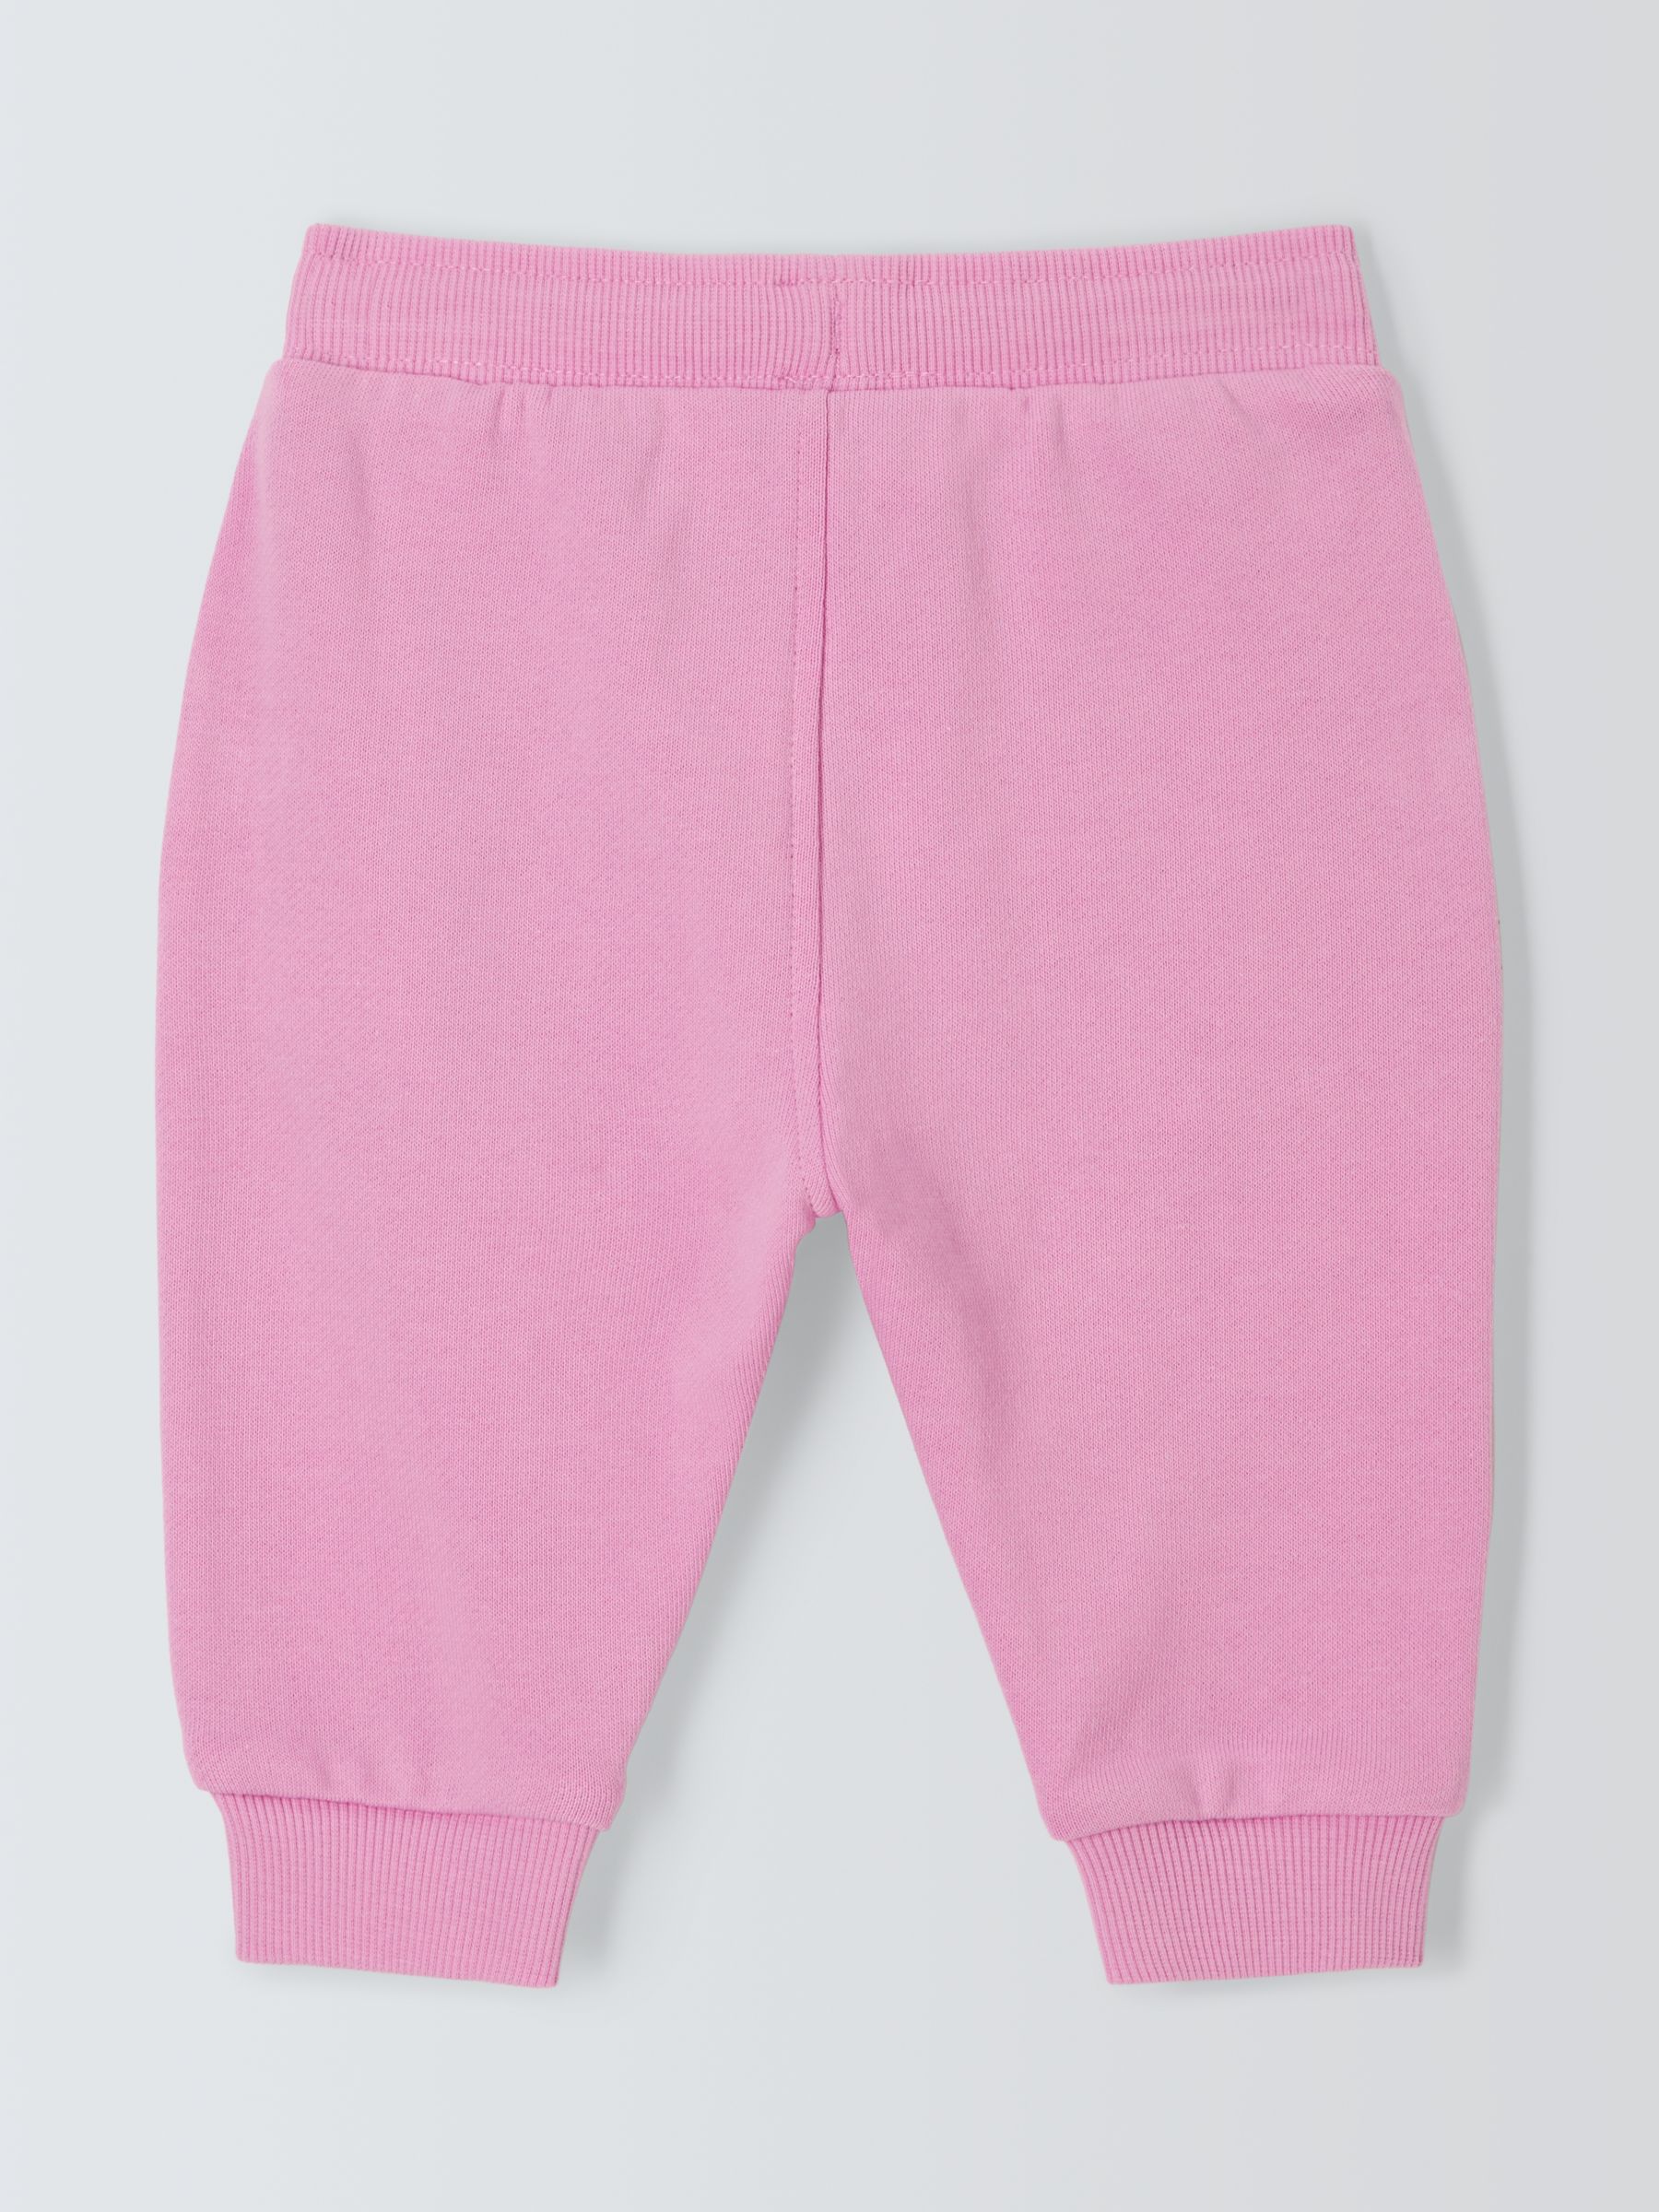 John Lewis ANYDAY Baby Cotton Joggers, Pink, 3-6 months